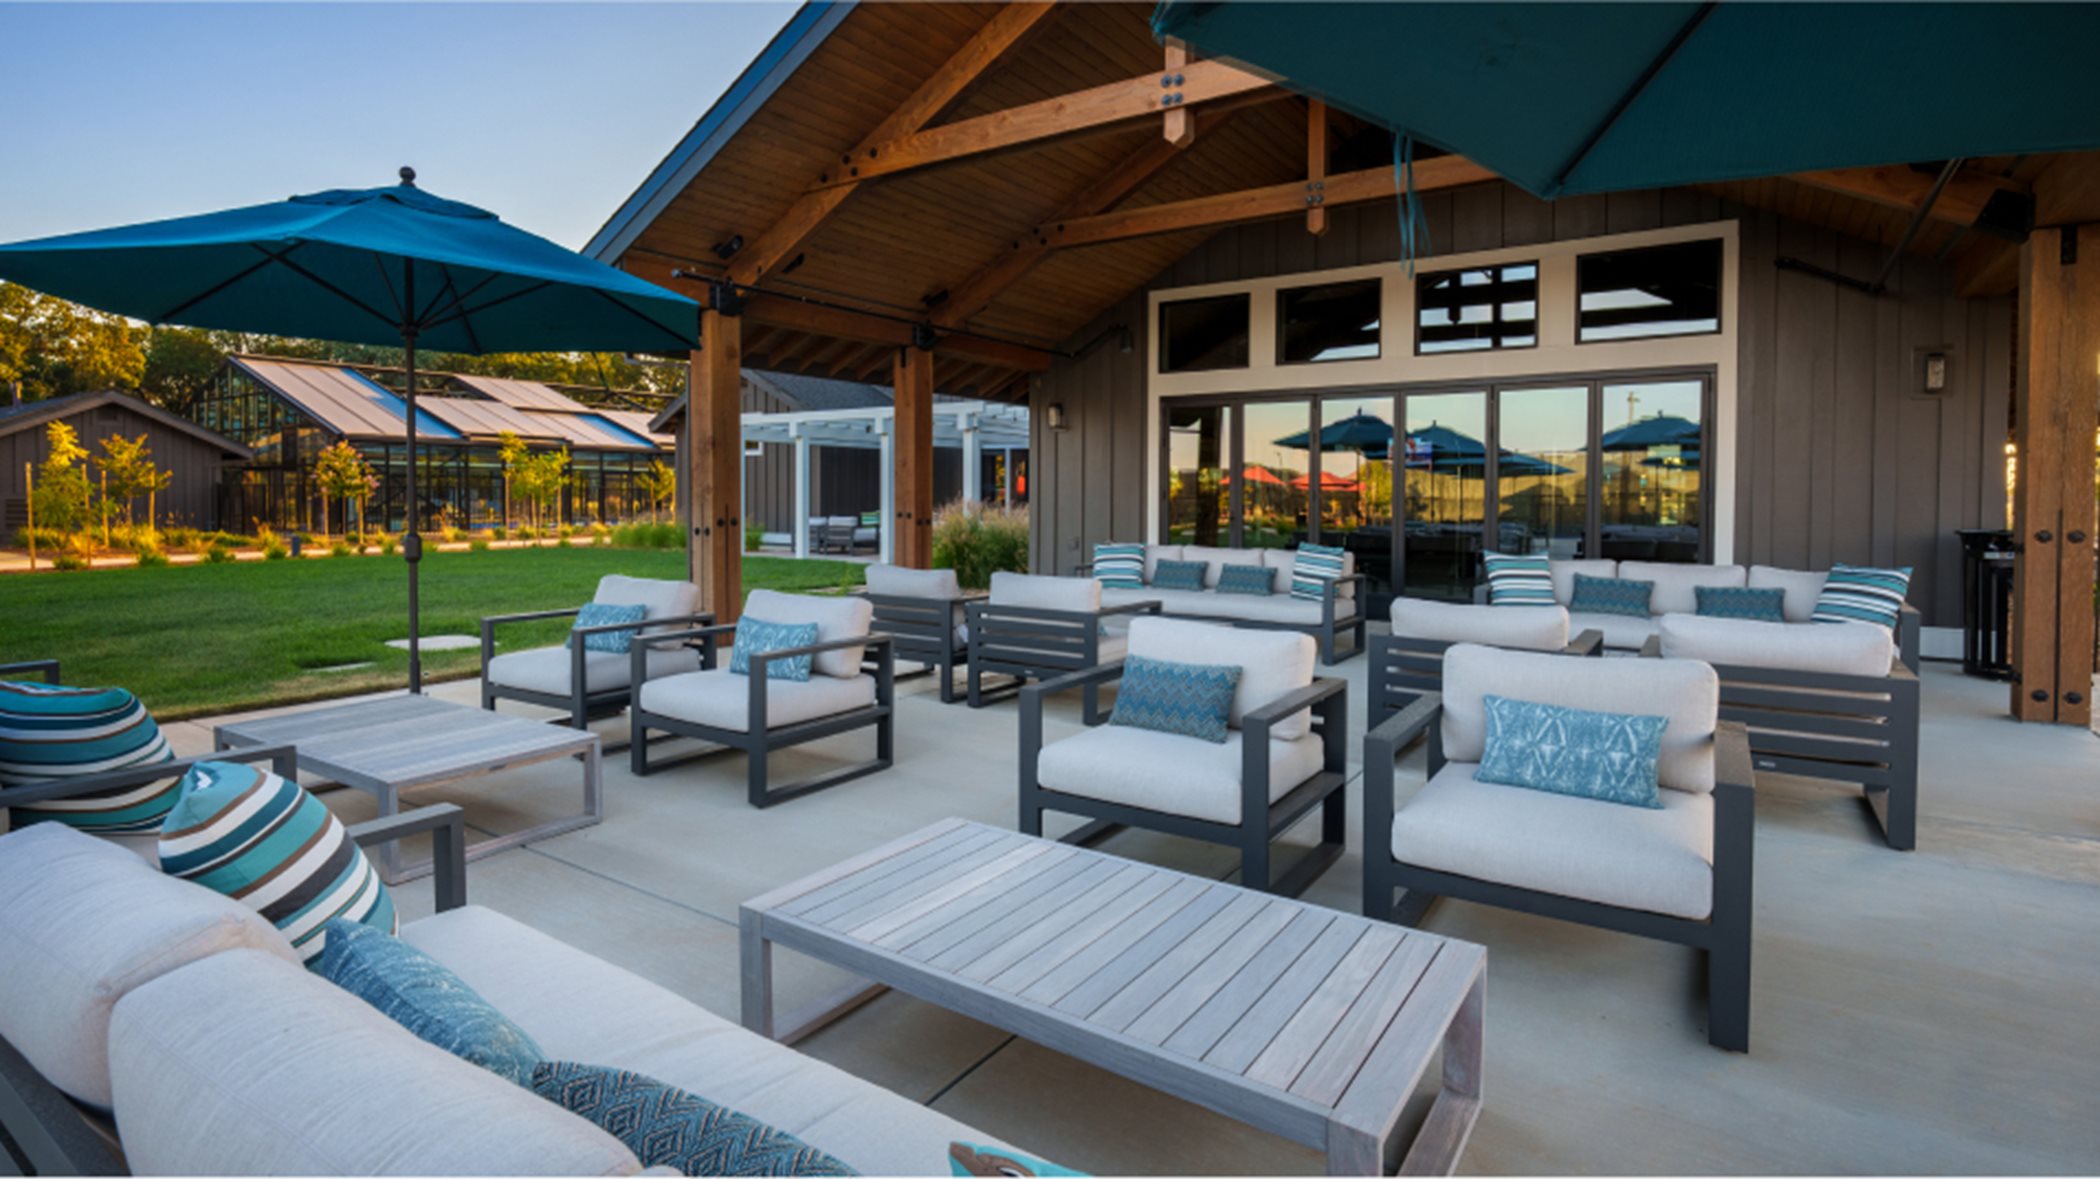 Outdoor seating area next to the clubhouse